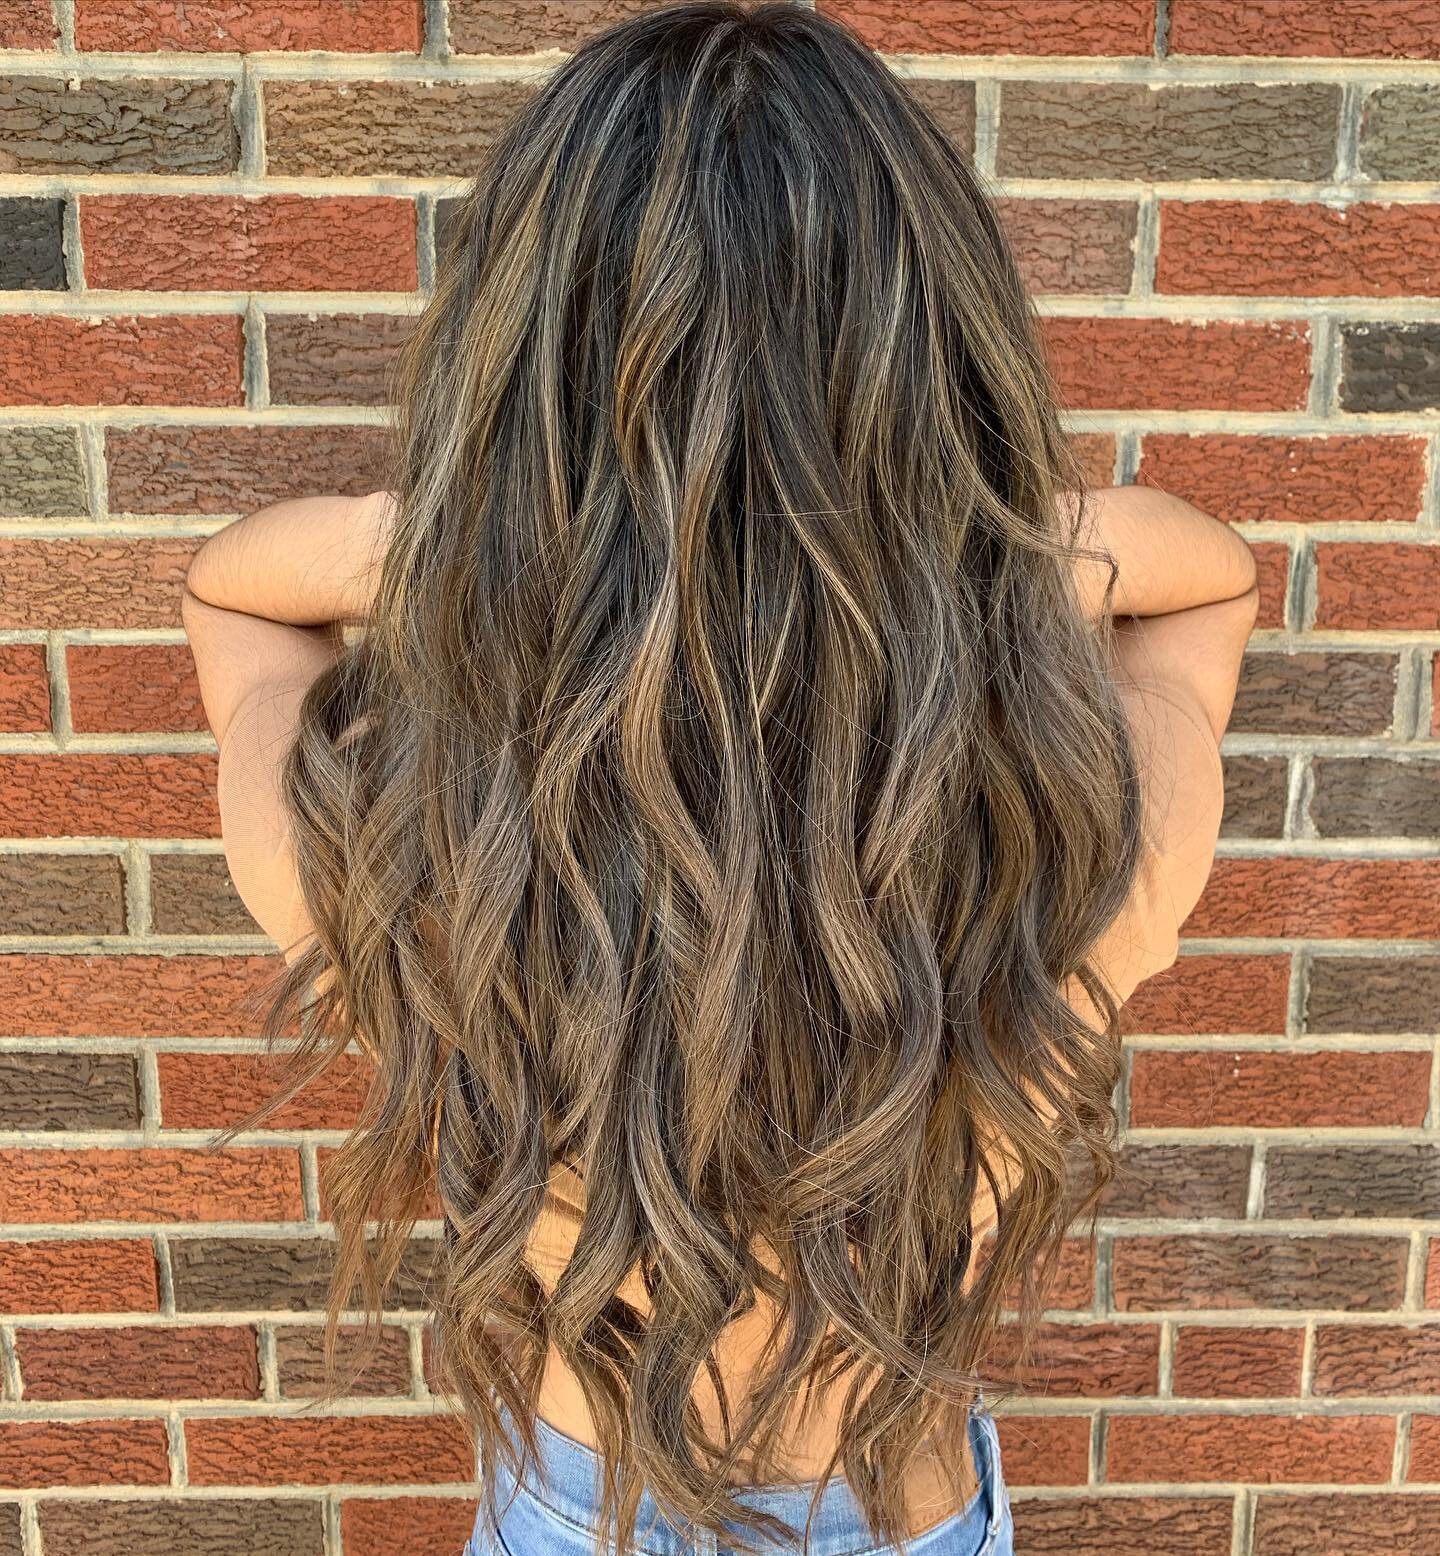 Gorgeous Highlights done by stylist @evelyns_beauty_world 

#portrichmond #phillyhairsalon #portrichmondsalon #phillyhairdresser #phillyhairandmakeupartist #portrichmondhair #phillyhairstylist #phillyhair #phillystylist #philly #phillymua #philadelph